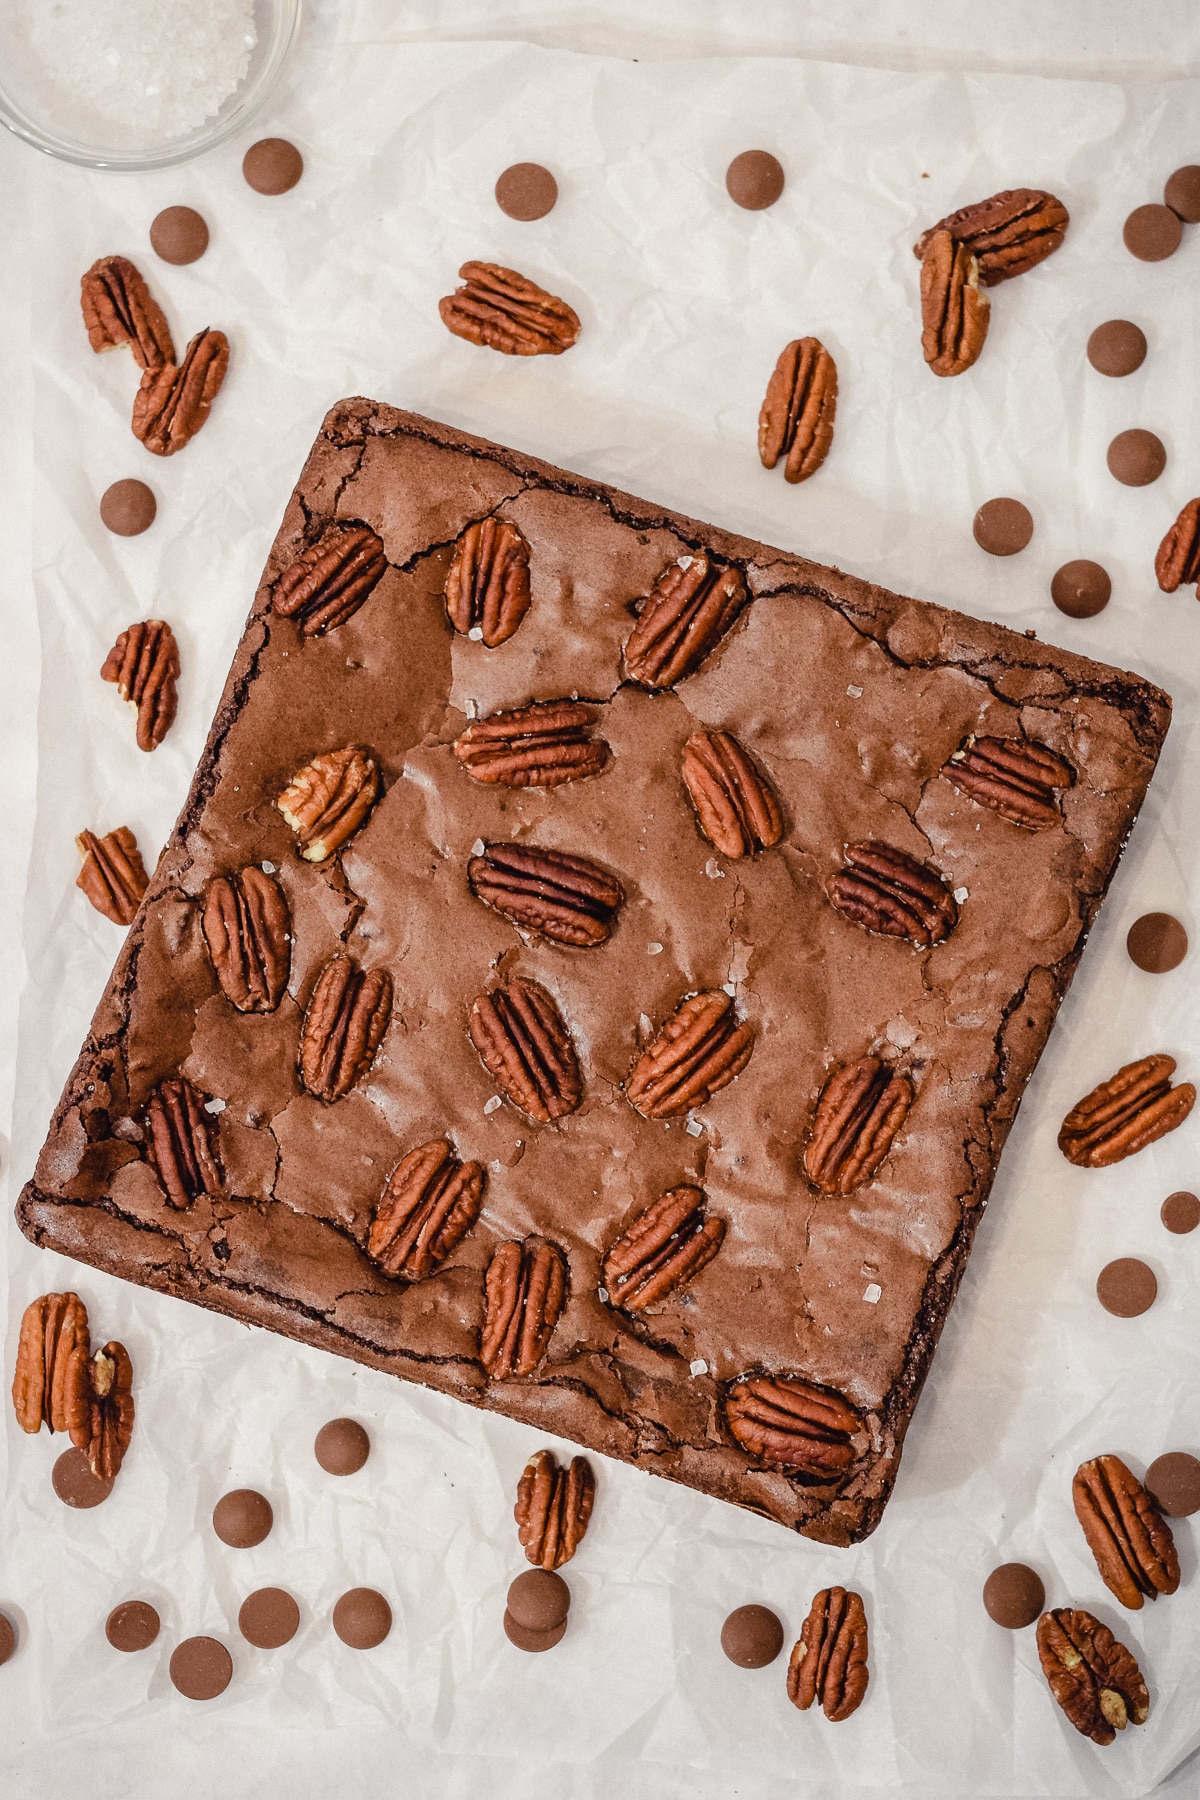 pecan brownies whole slab with chocolate chips, pecans and sea salt